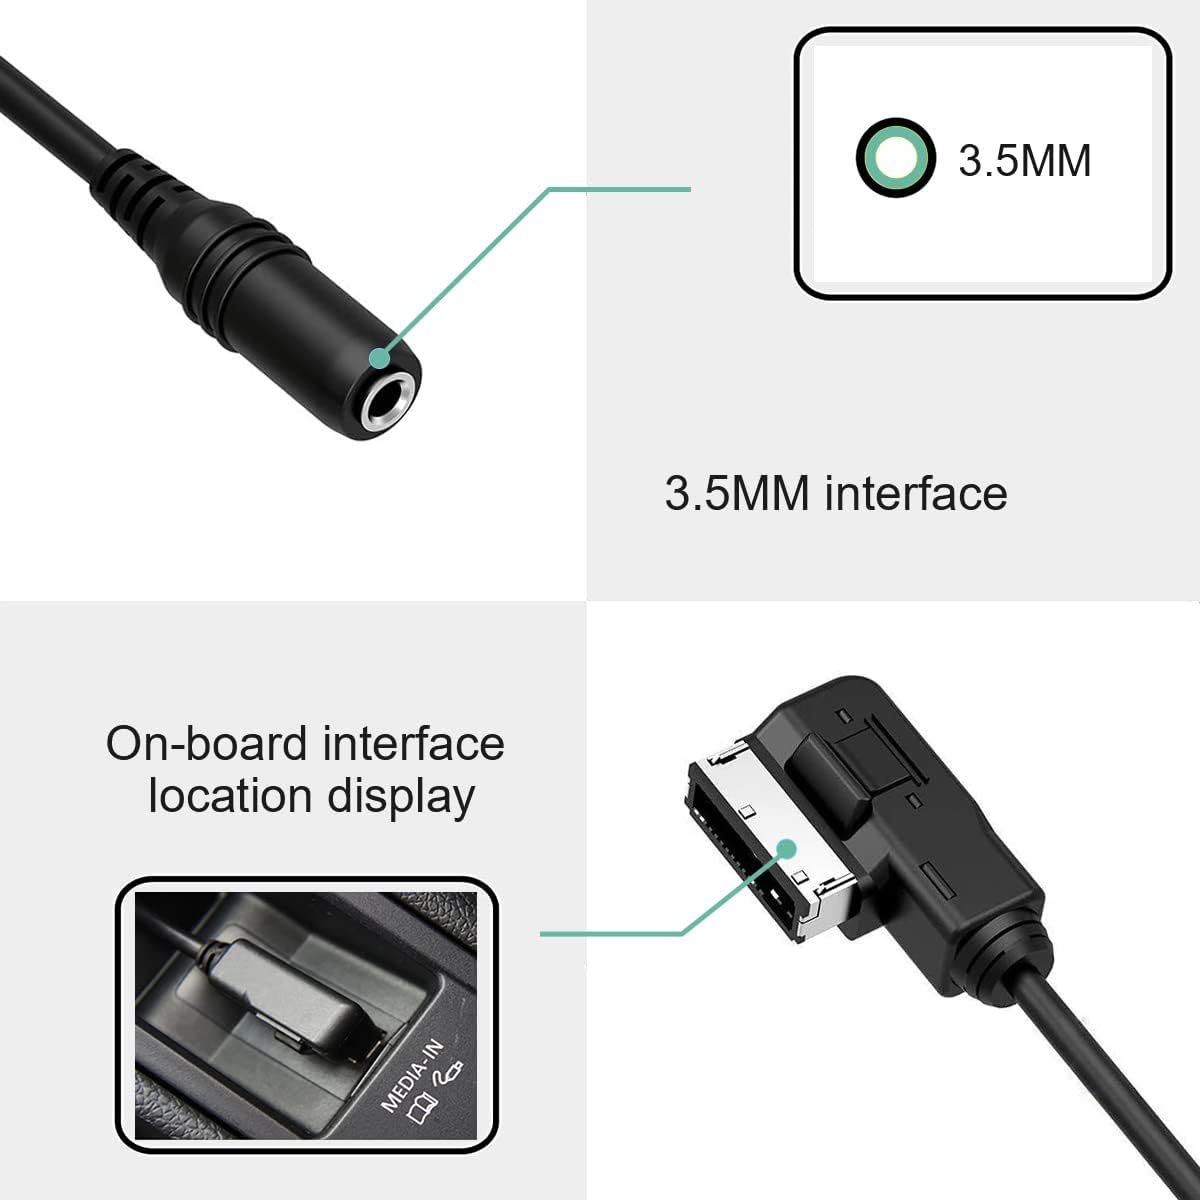 AMI MMI Music Interface to 3.5mm Female Audio Cable For Audi A3/A4/A5/A6/A8/Q5/Q7/R8/TT VW ect.